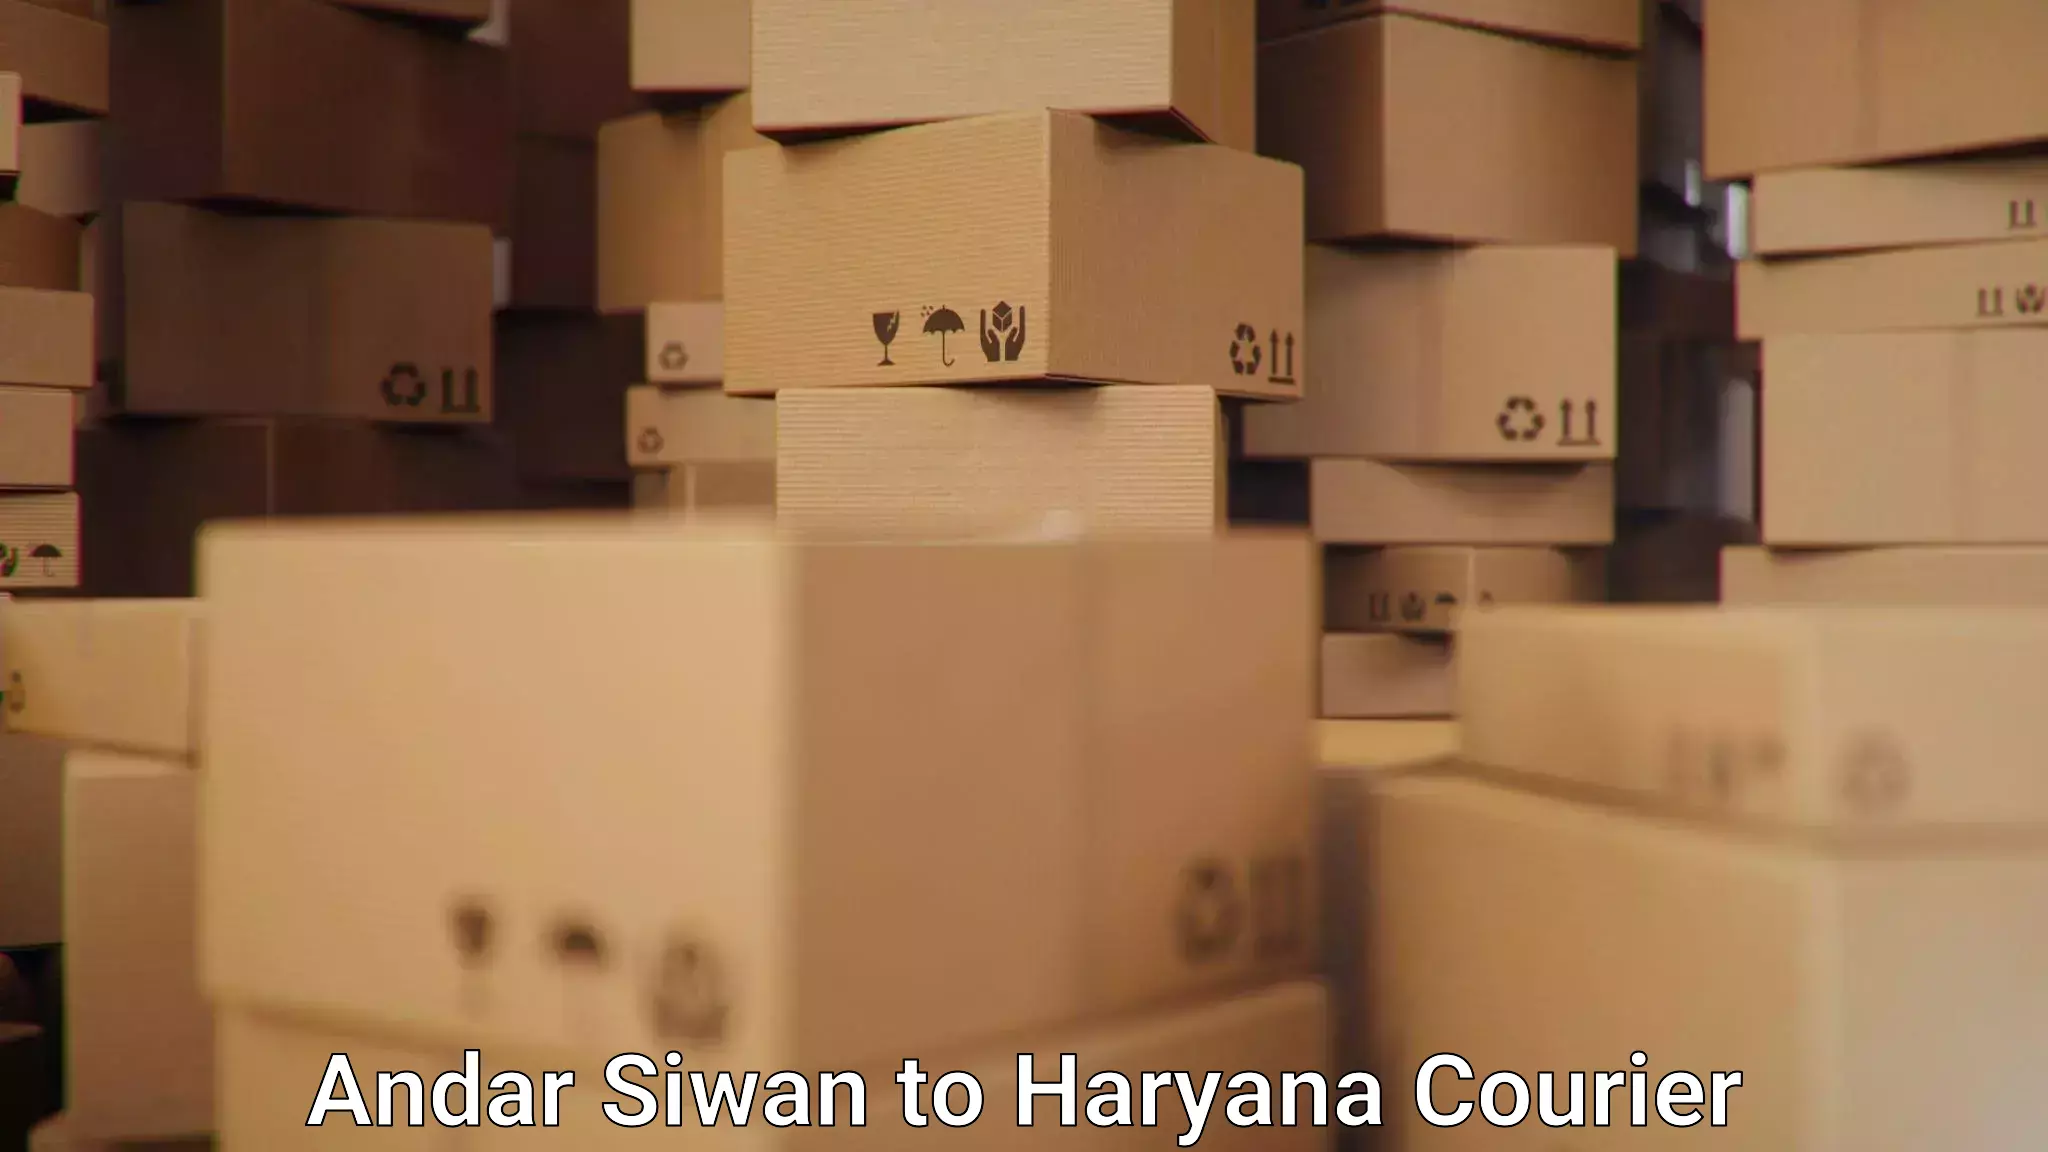 Courier dispatch services Andar Siwan to Chaudhary Charan Singh Haryana Agricultural University Hisar